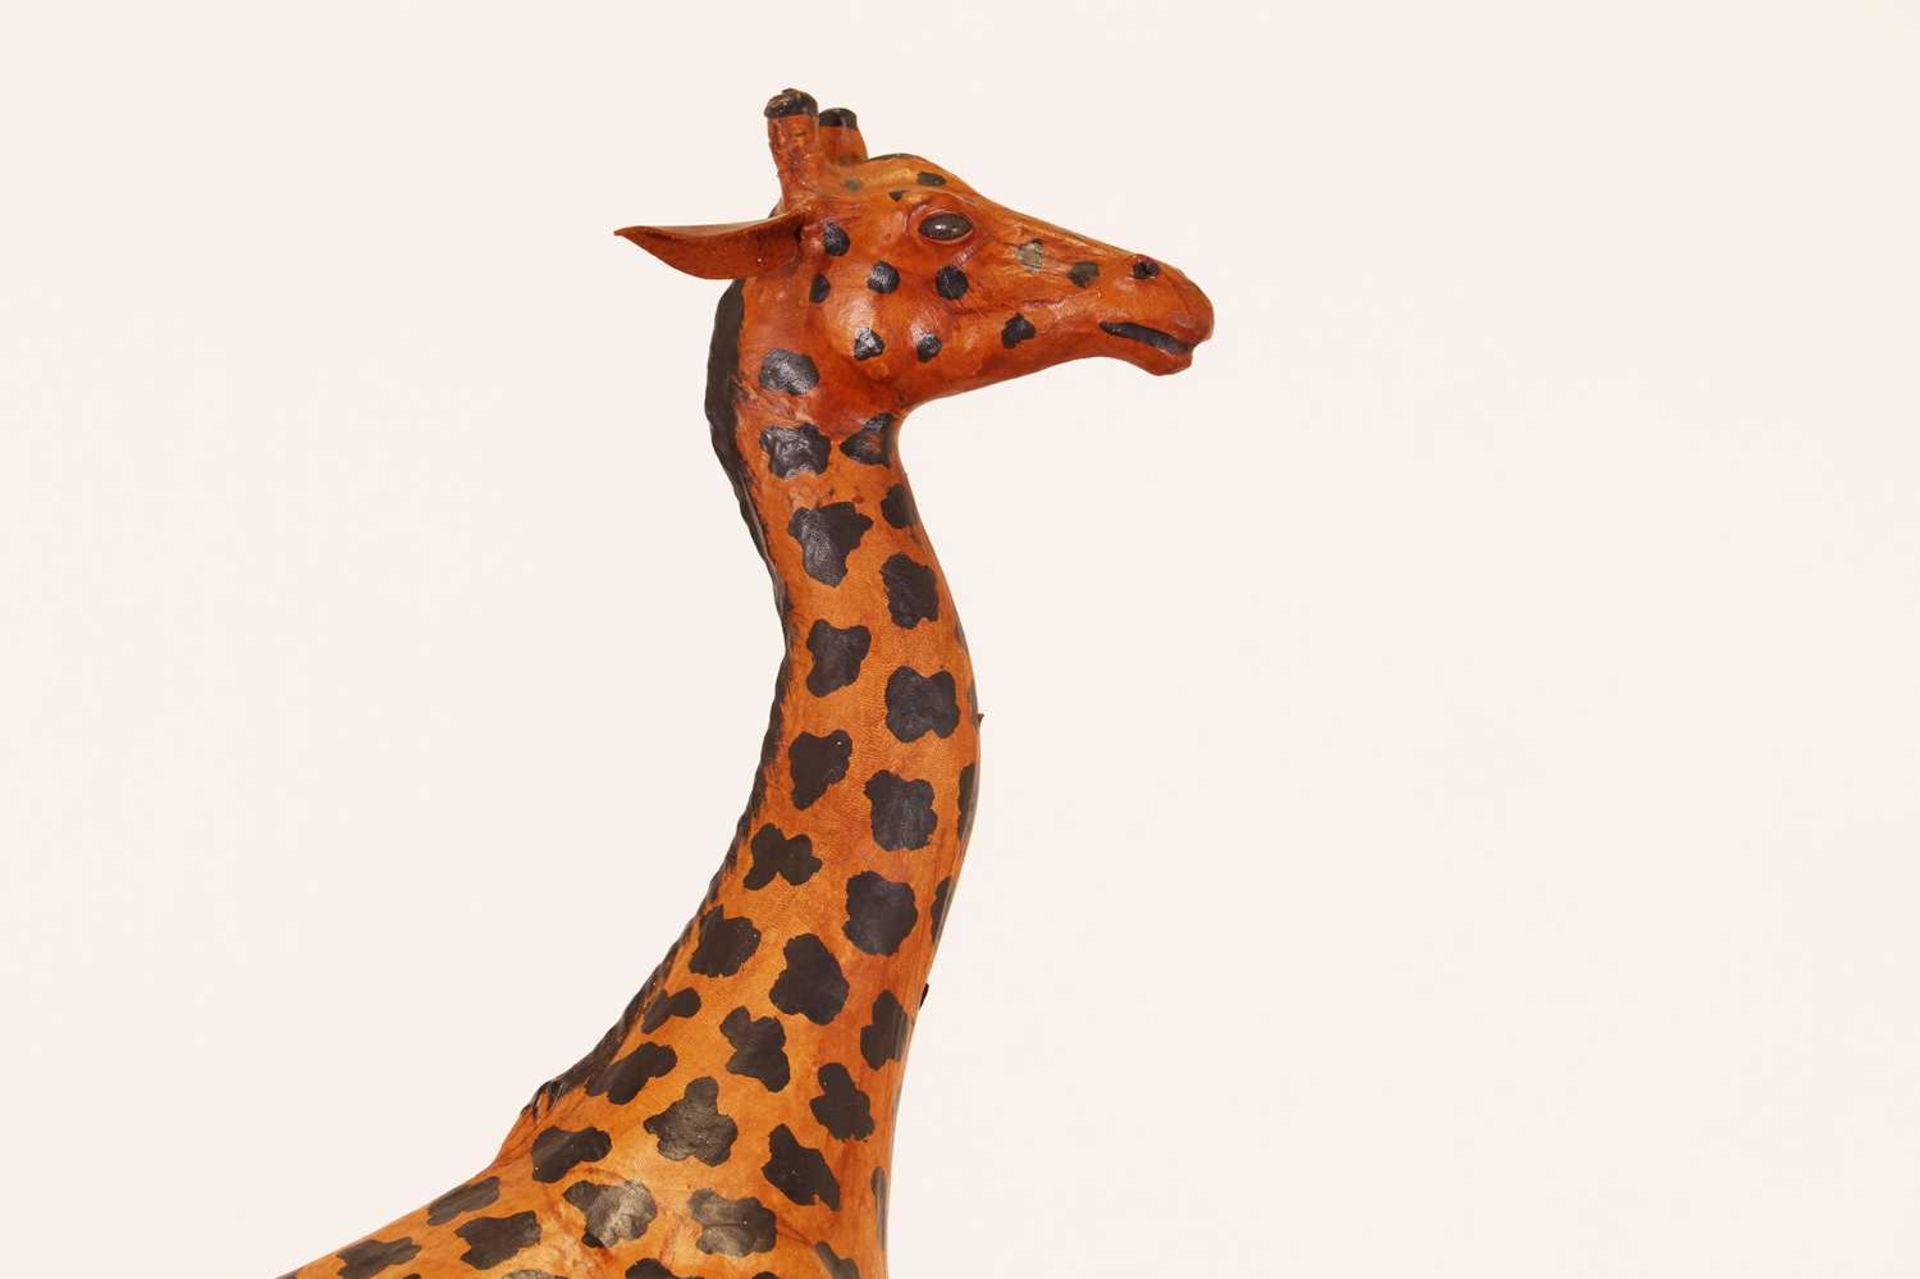 A pair of painted hide figures of giraffes, - Image 8 of 30